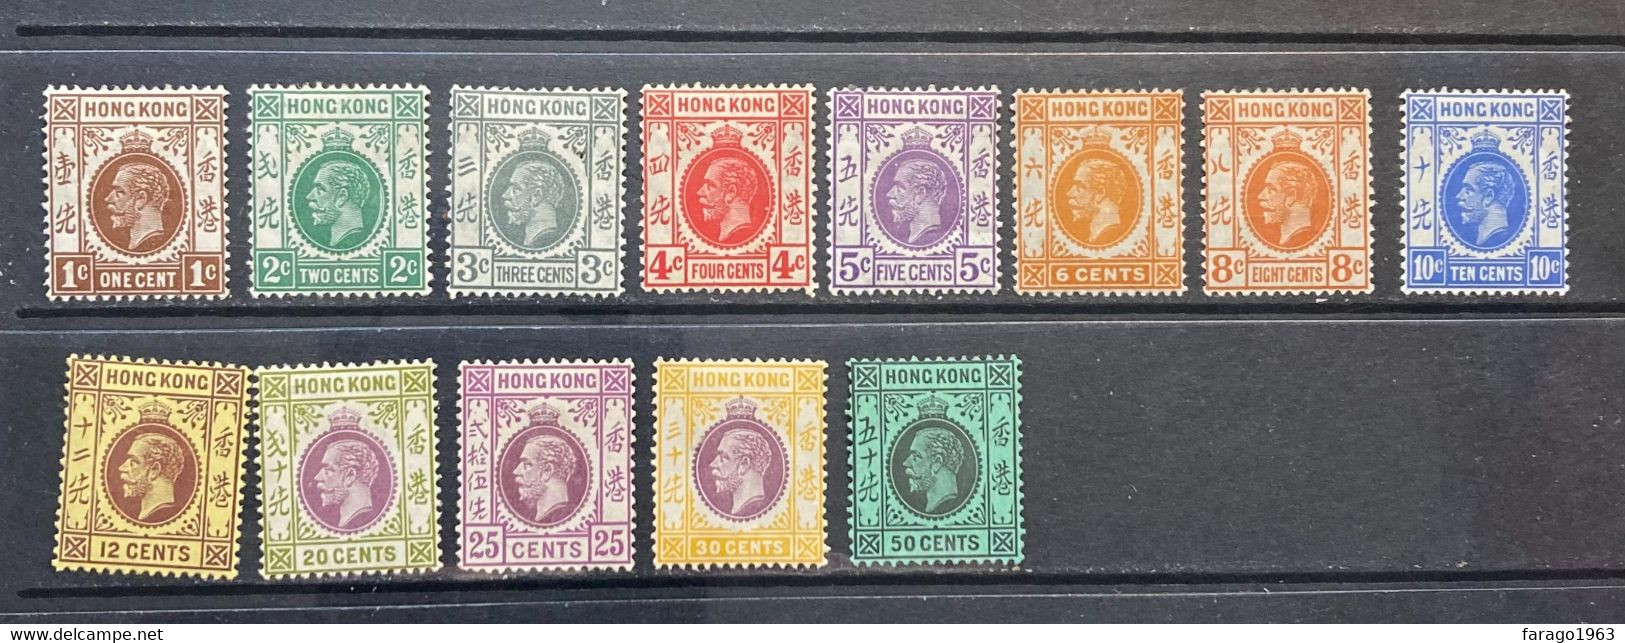 1921 Hong Kong KGV Definitives   Thirteen (13) Different Stamps Mint Hinged Fresh Colour! Cat £150 - Unused Stamps